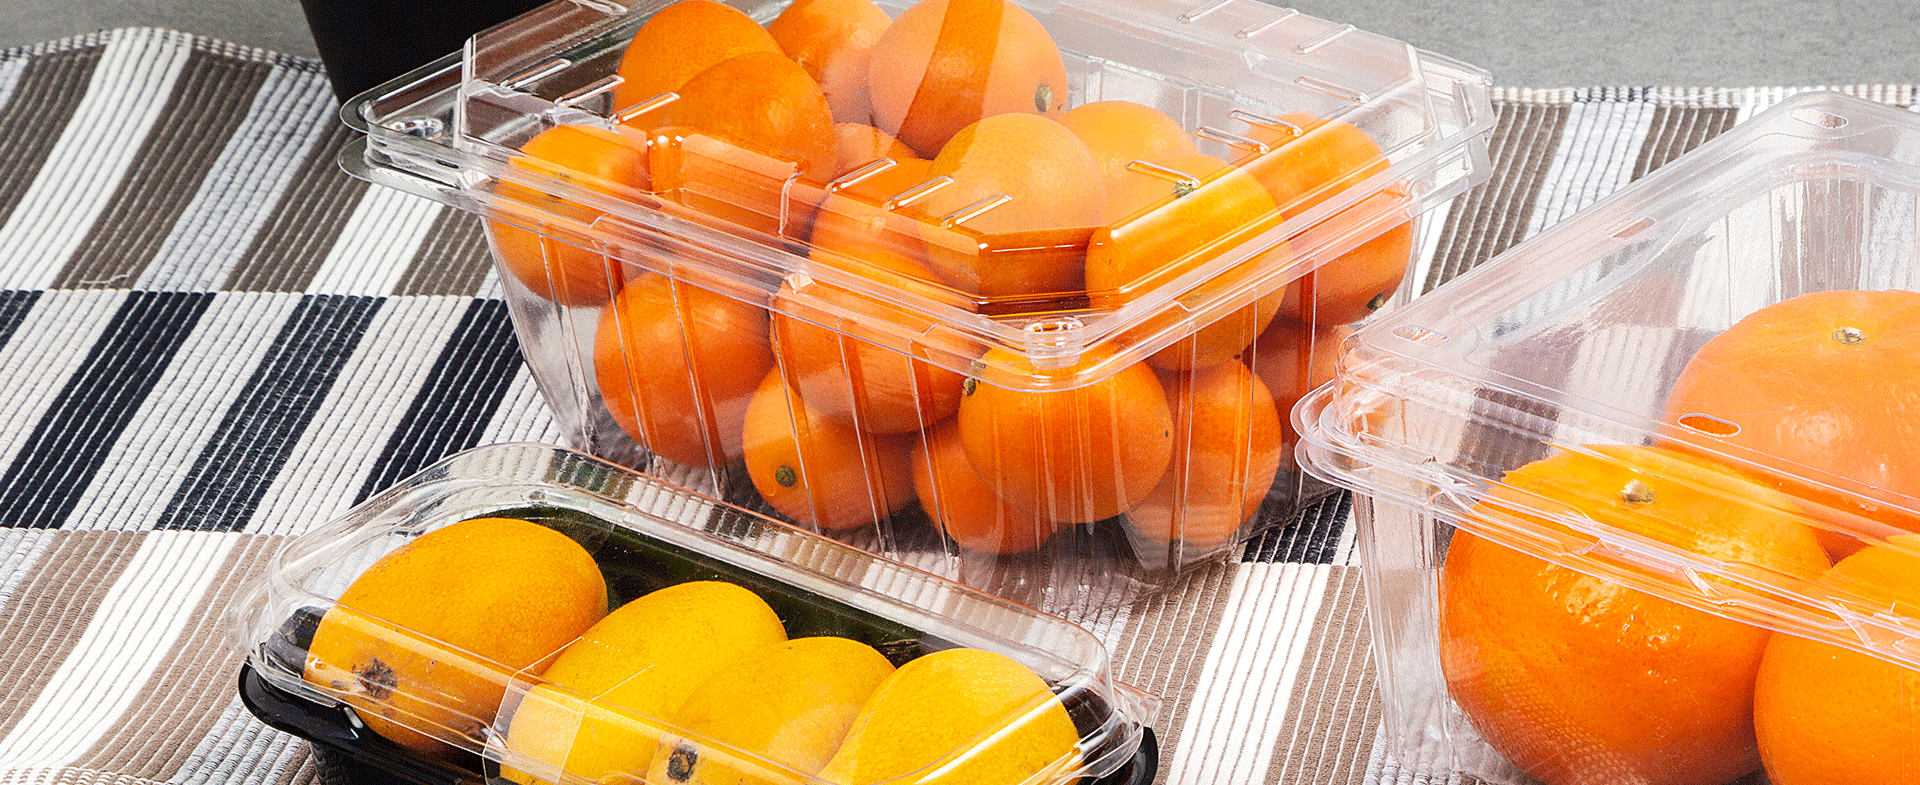 Quality Control of Lesui Disposable Fruit & Vegetable Container